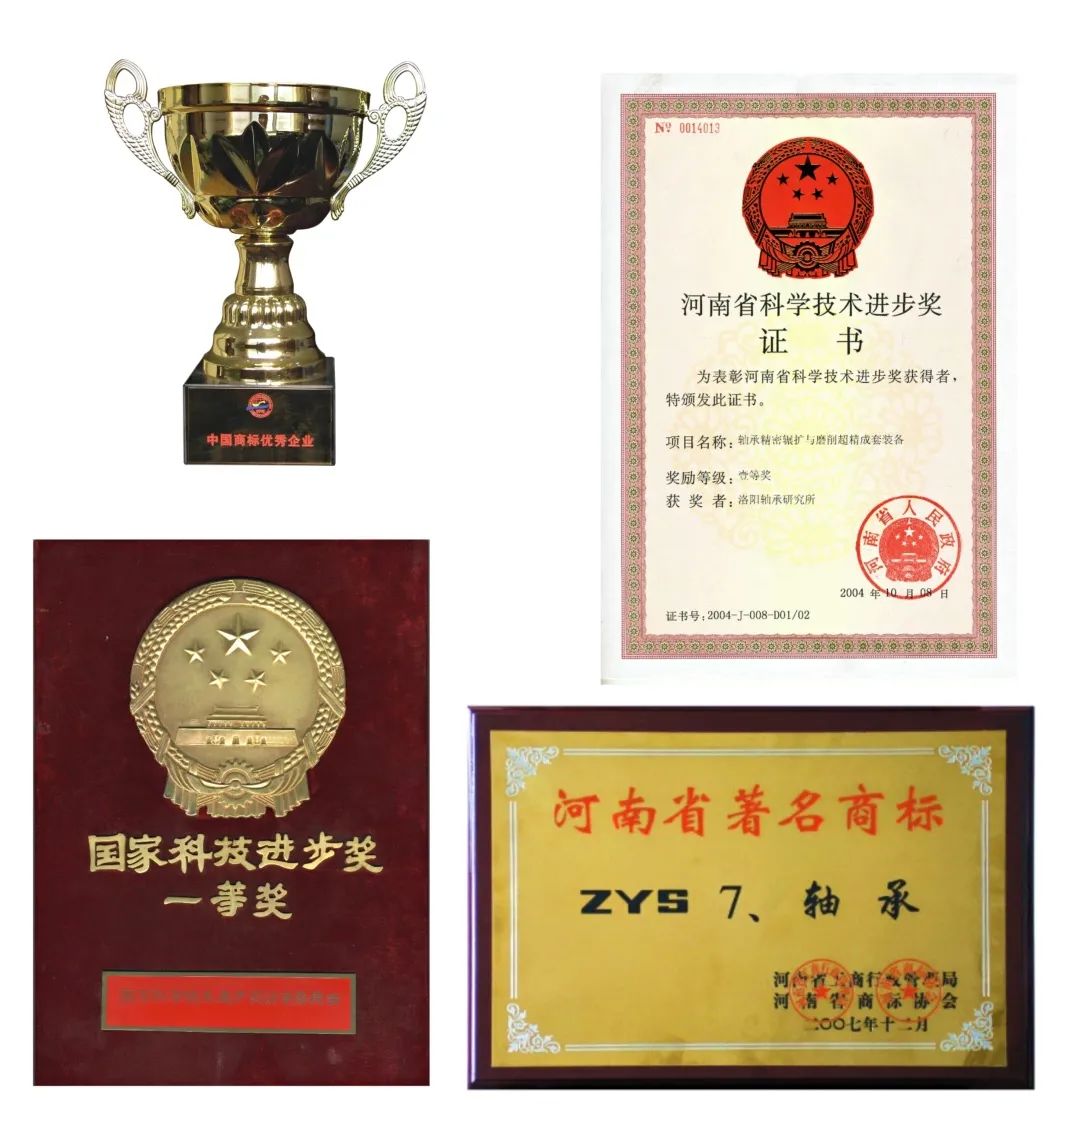 Celebrating the 65th anniversary of the establishment of Luoyang Bearing Research Institute Co., Ltd(ZYS)